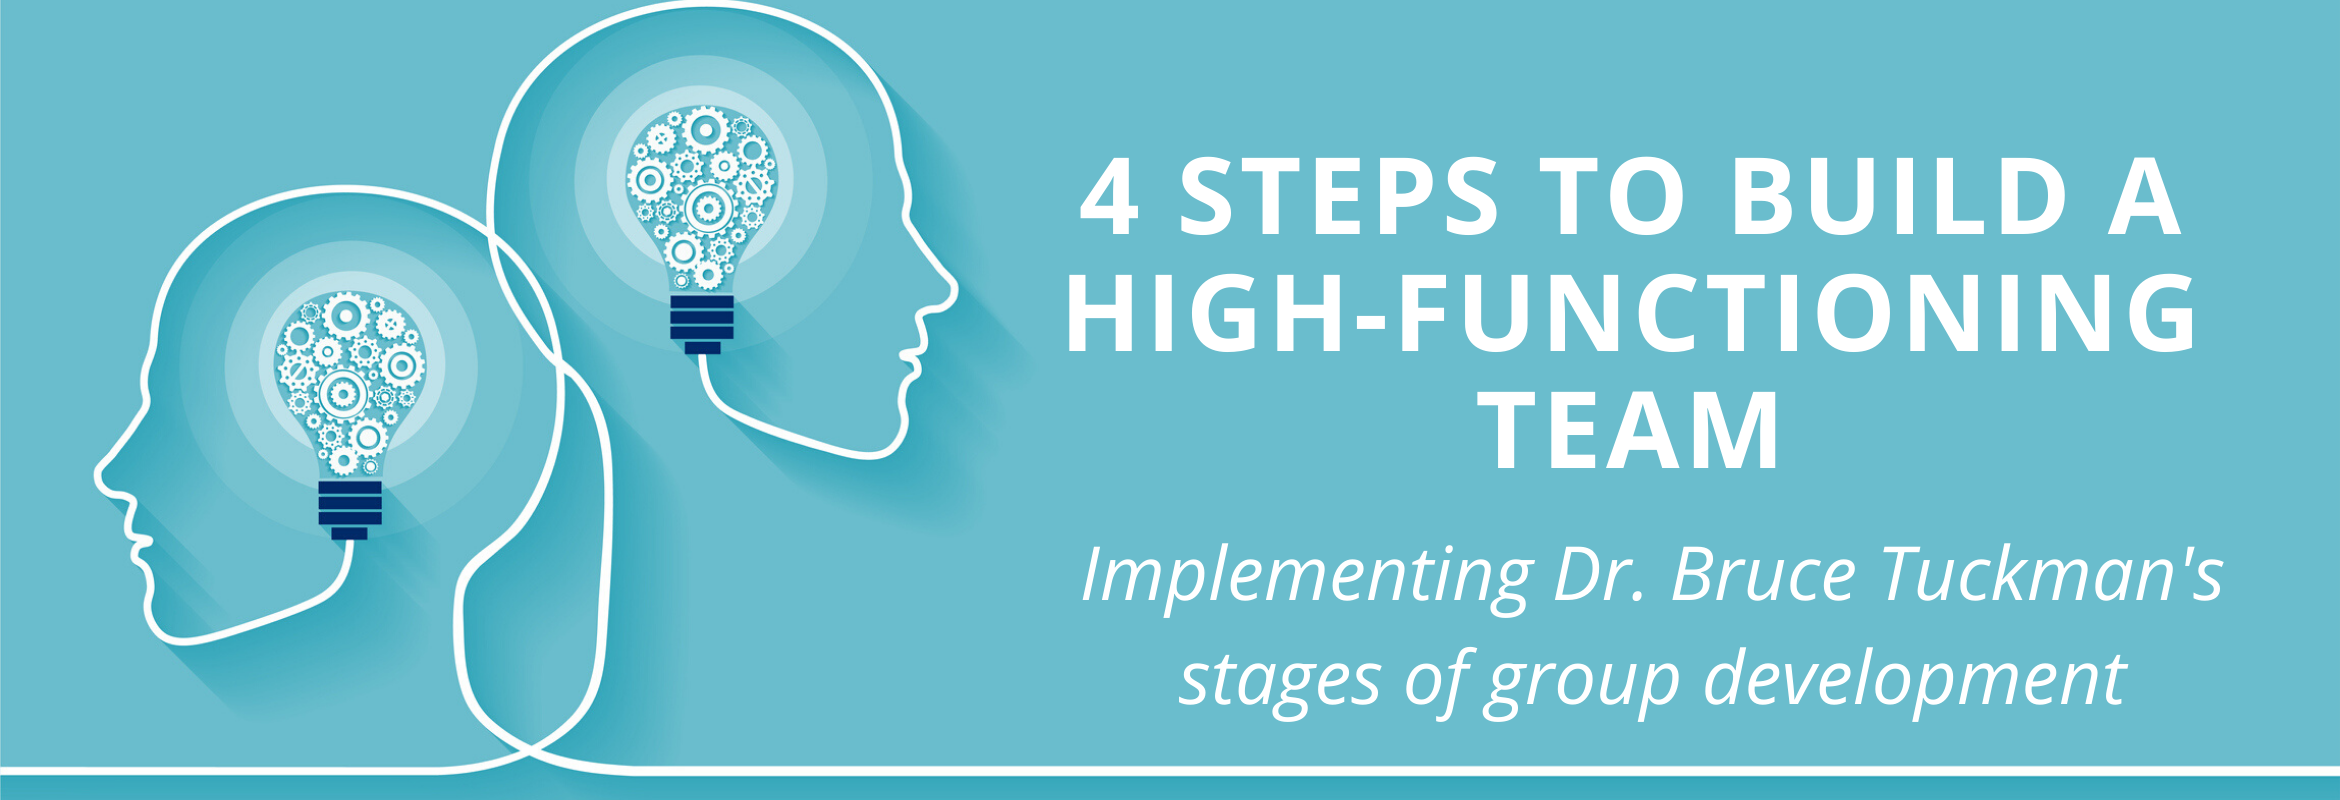 Implementing Dr. Bruce's Tuckman's four stages of group development